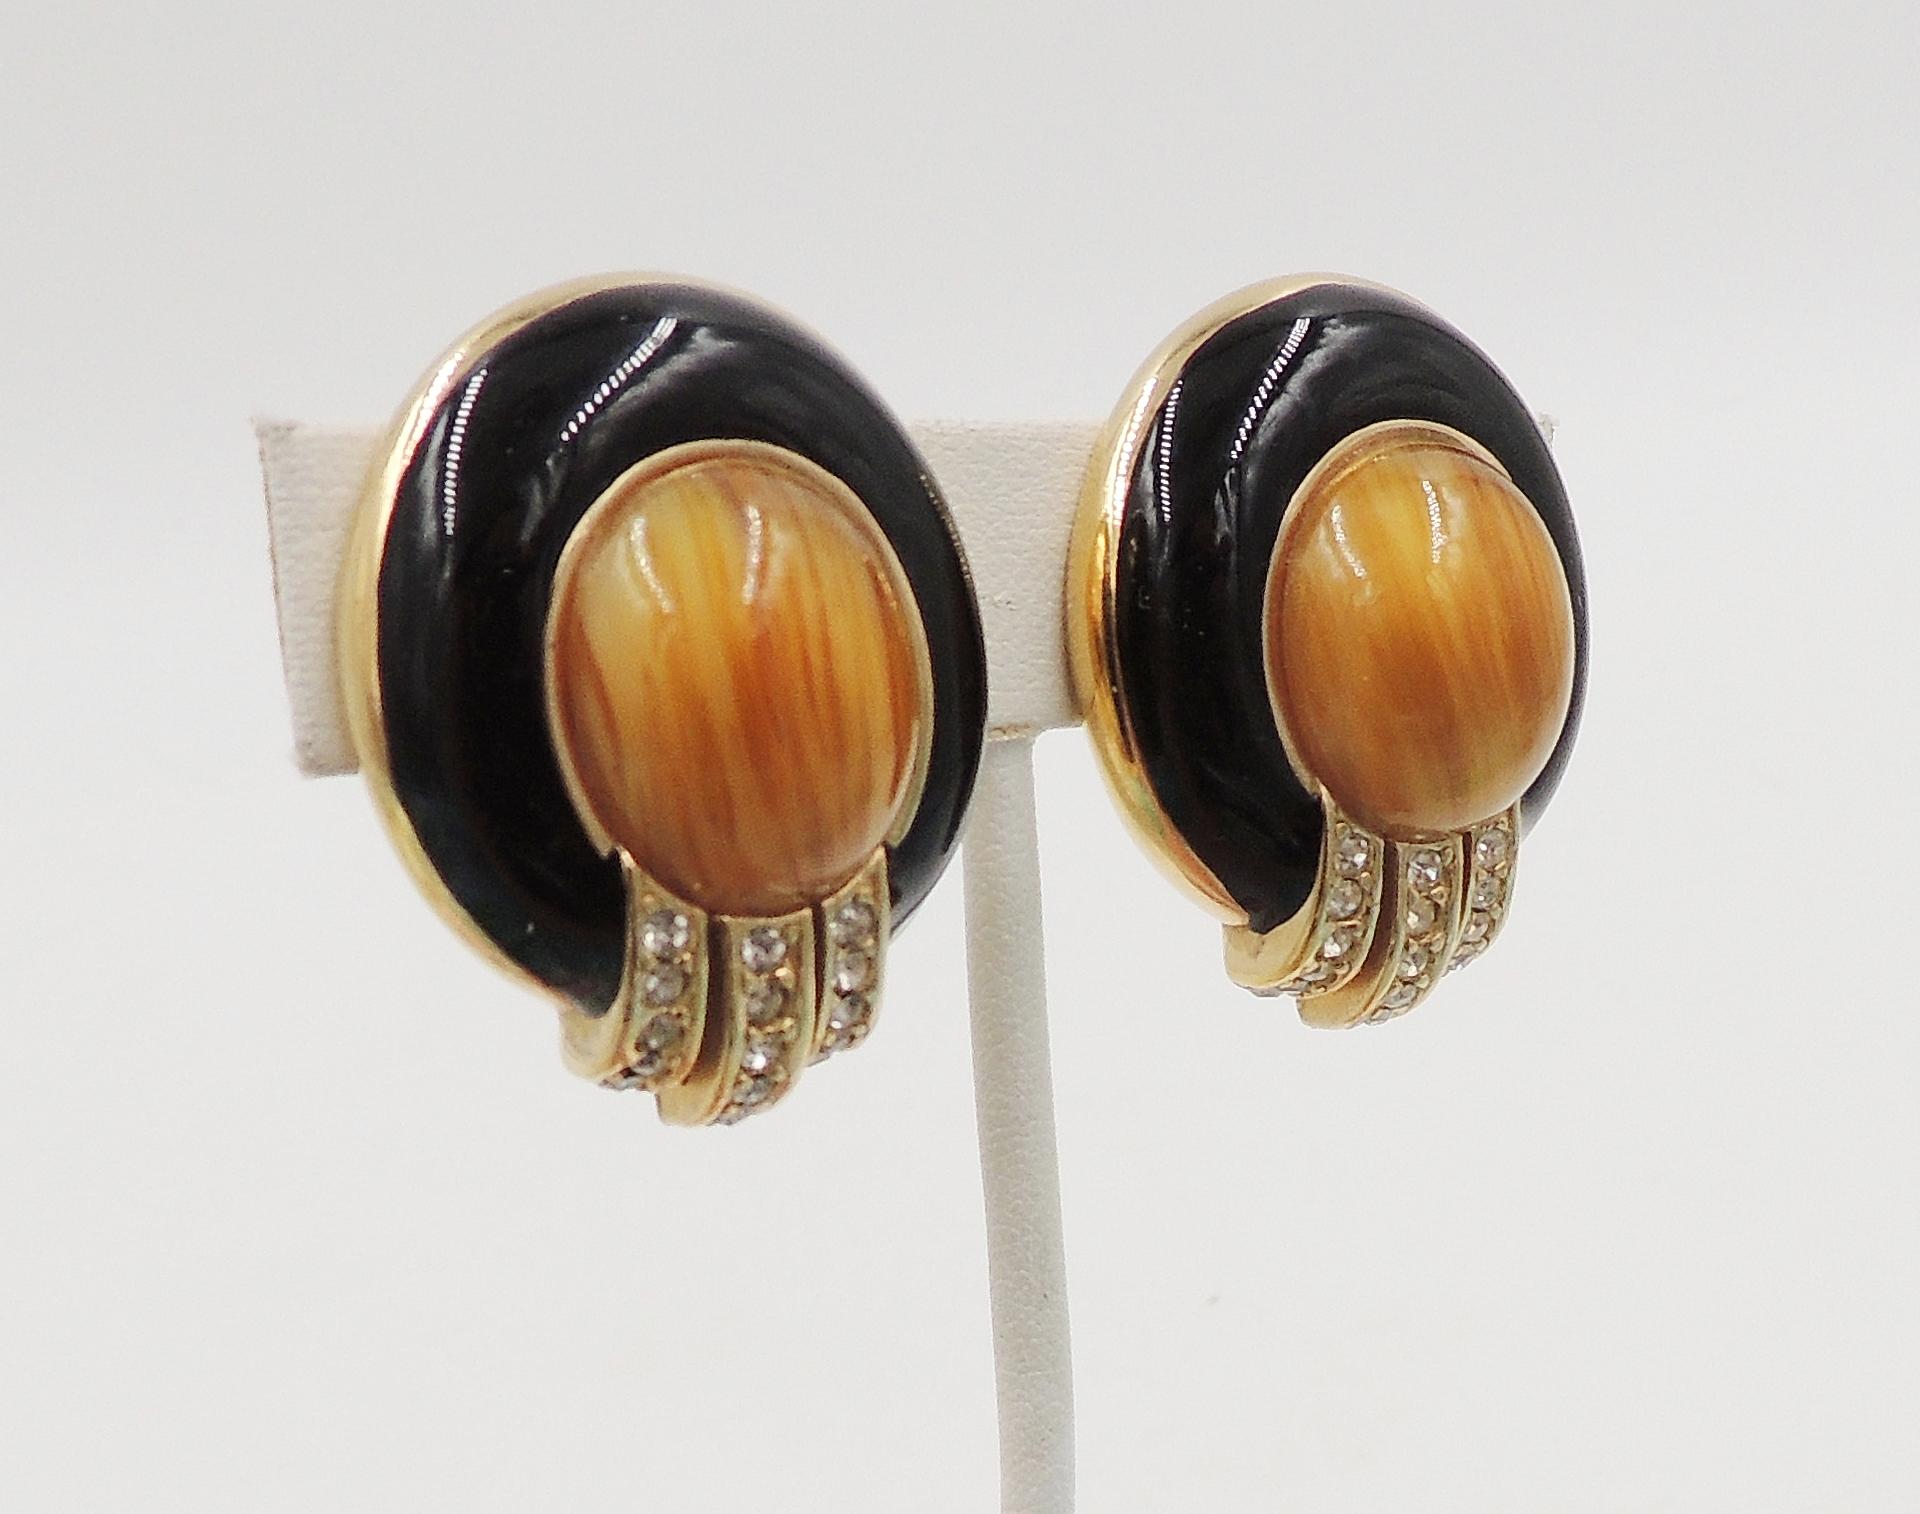 1980s goldtone cabochon faux-agate, black enamel and rhinestone clip back earrings. Marked 